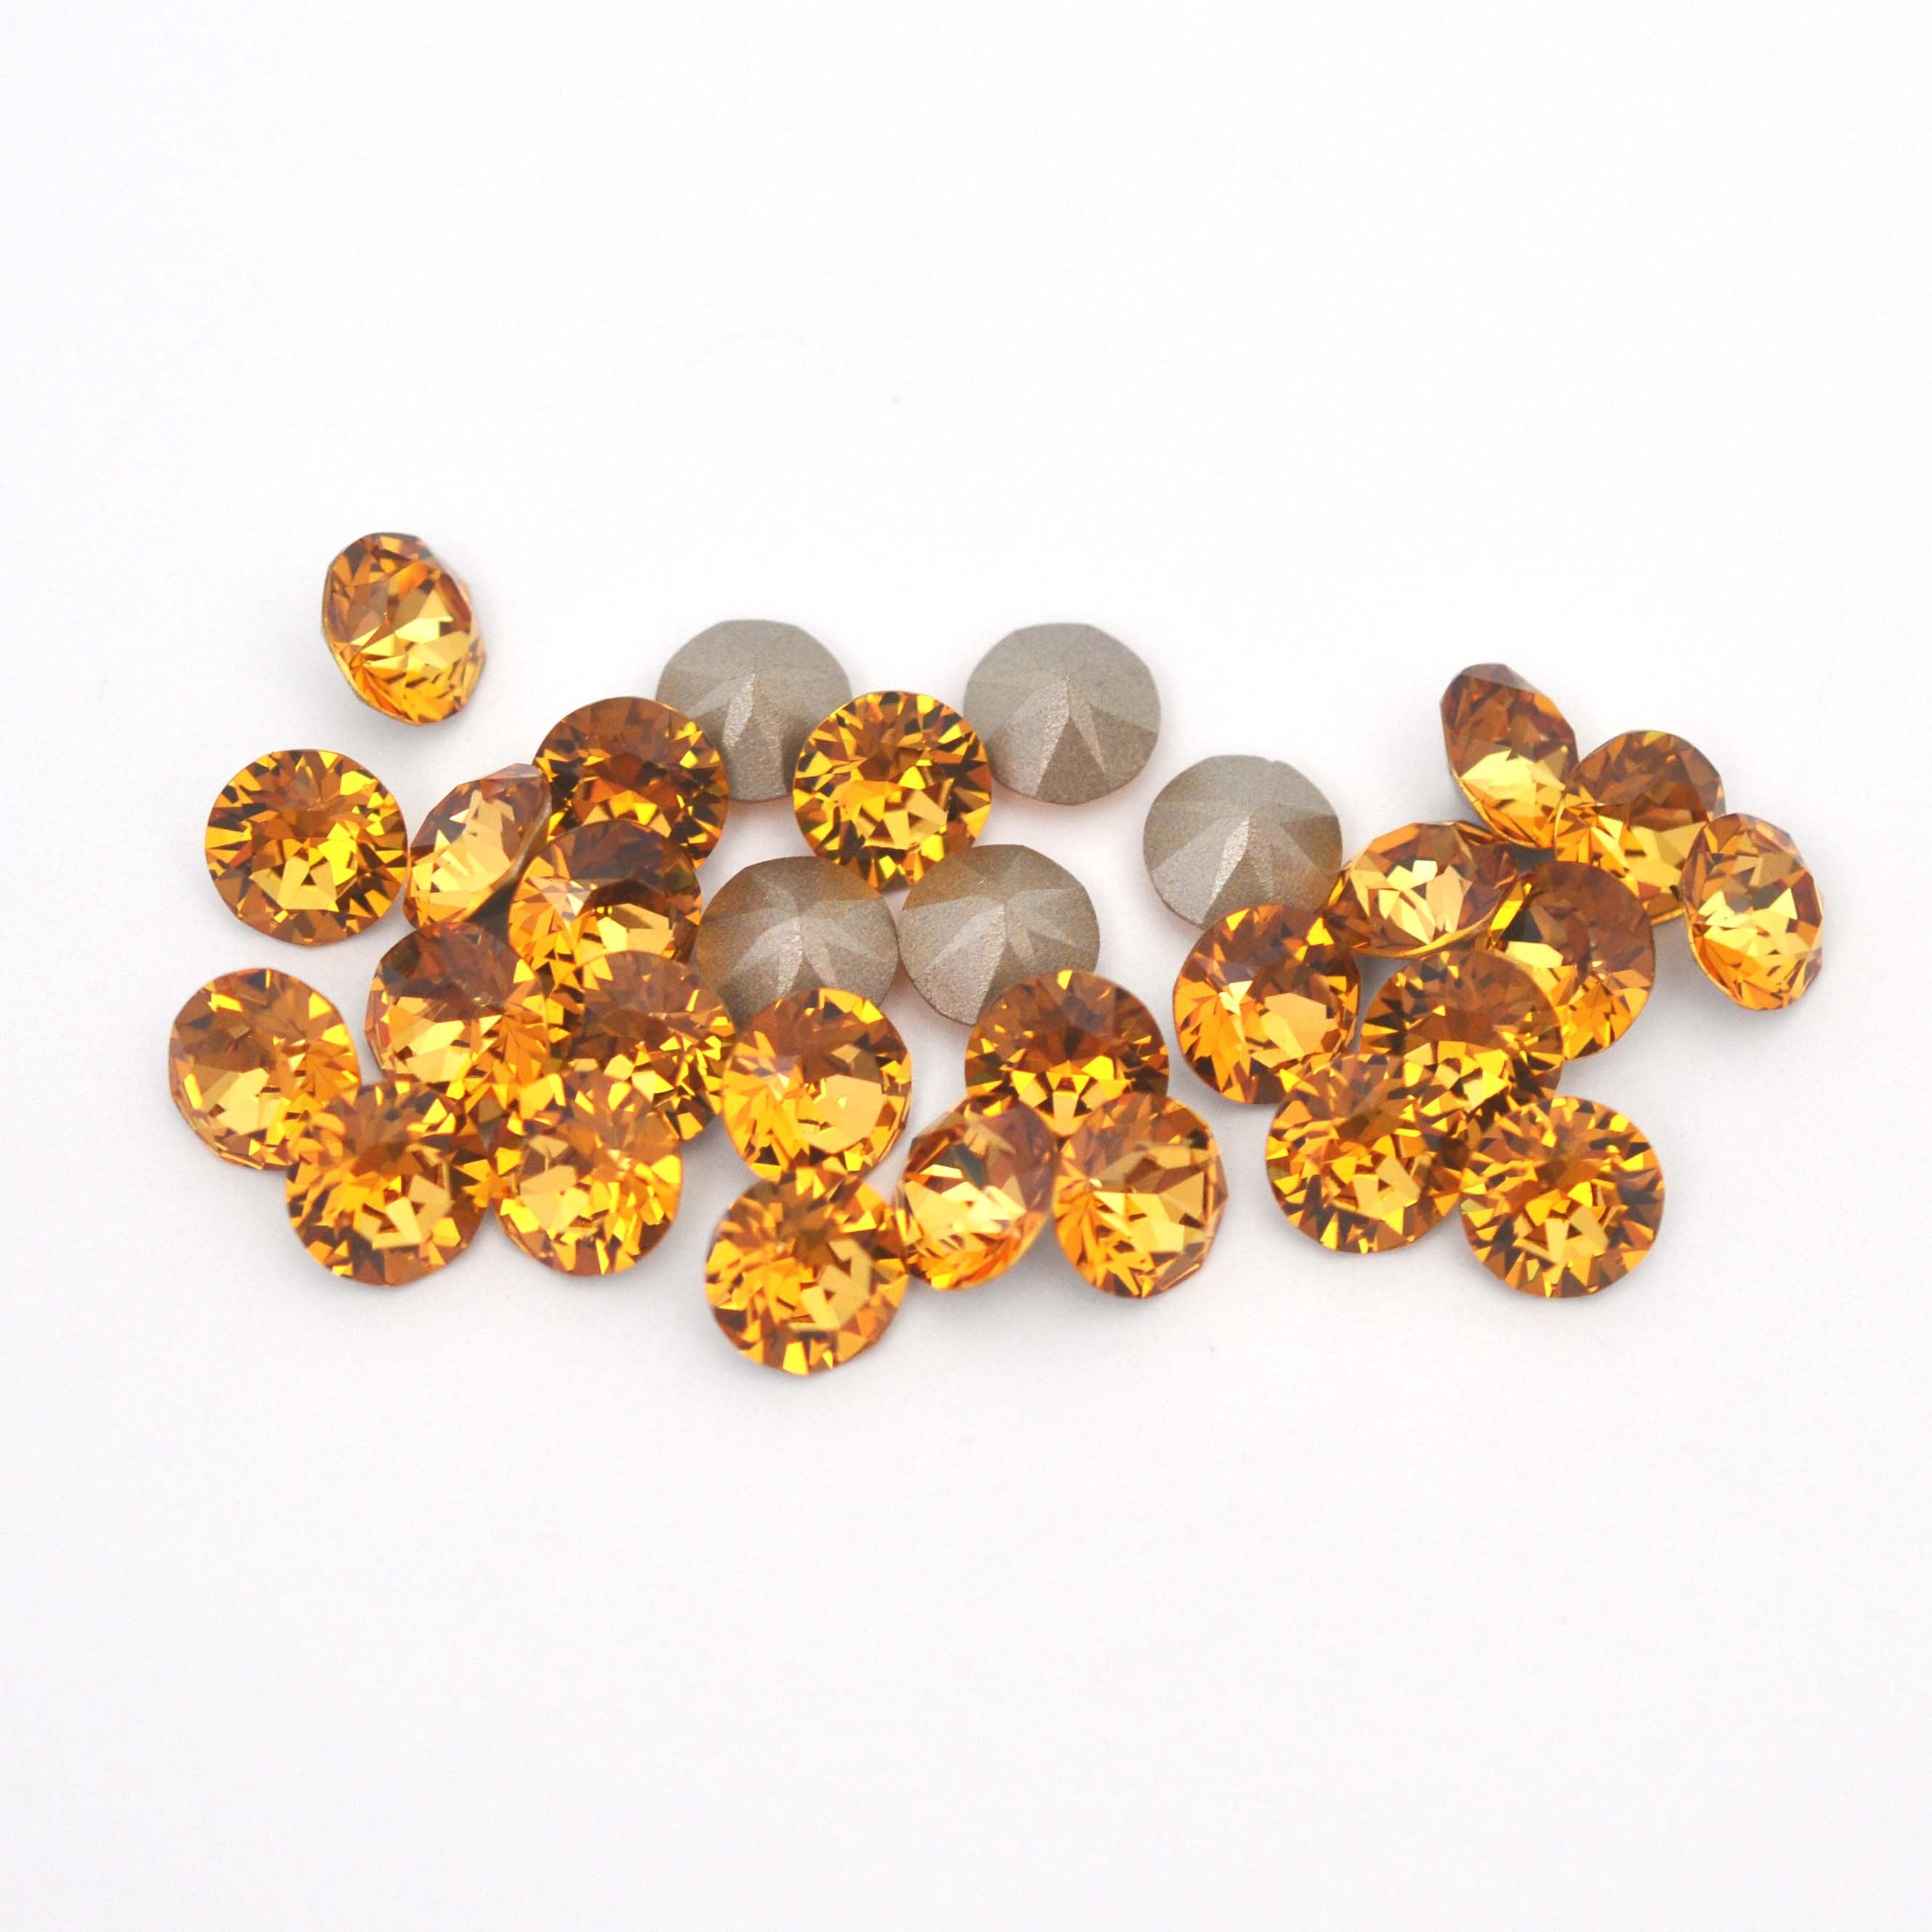 Golden Topaz 1088 Pointed Back Chaton Barton Crystal 39ss, 8mm